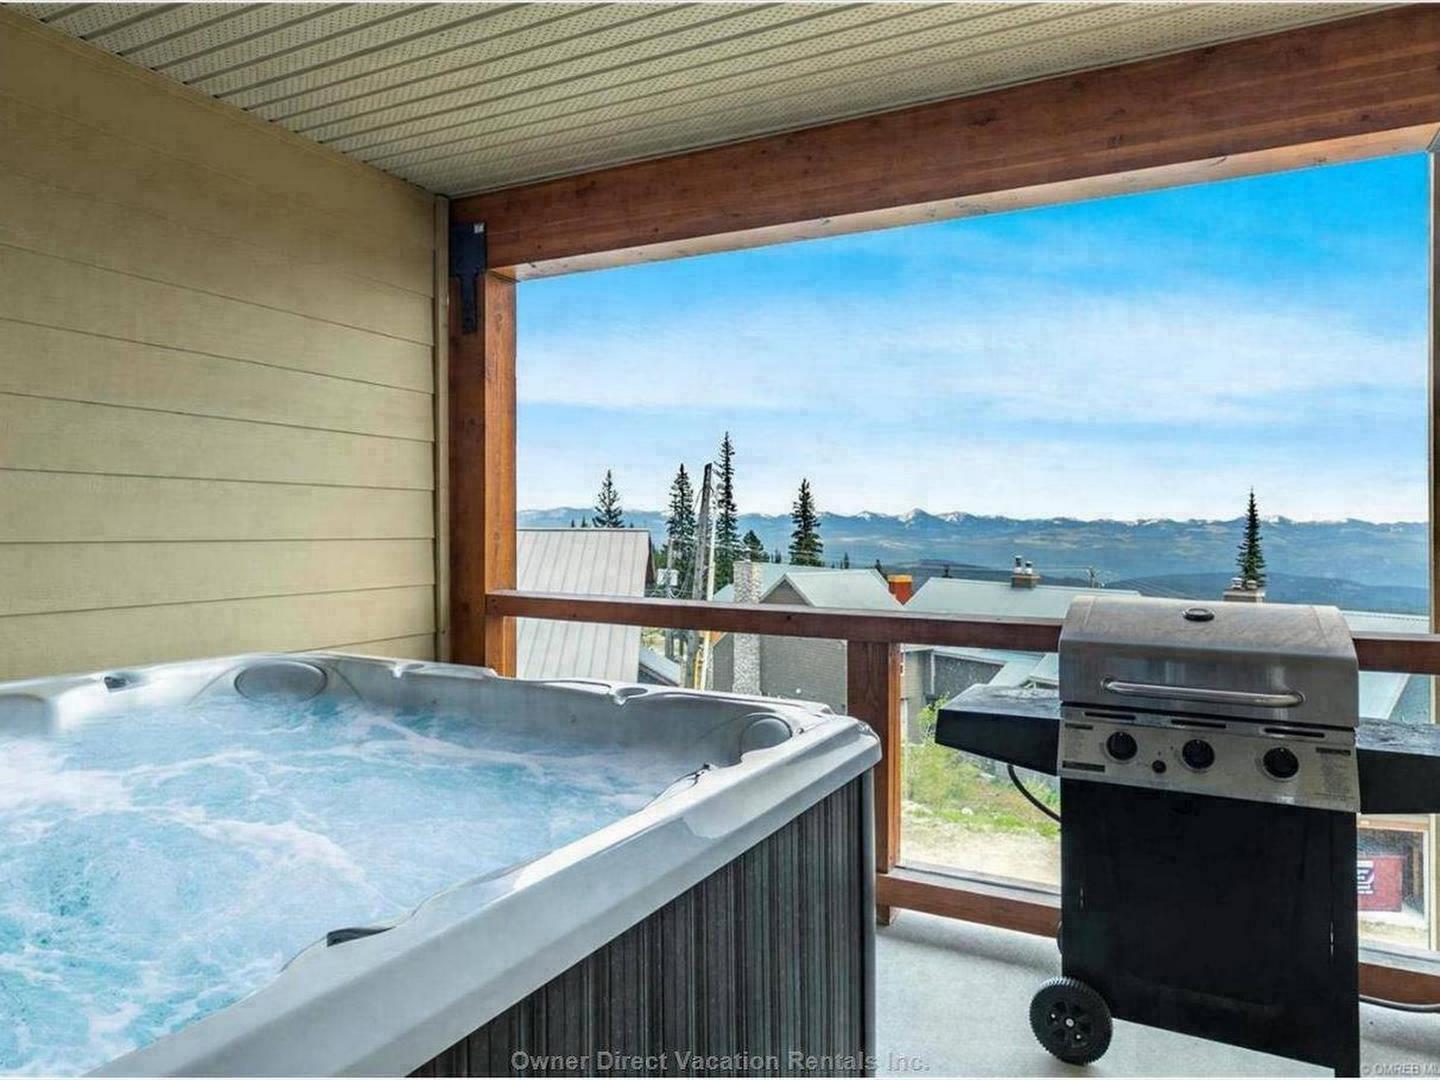 The private deck with a hot tub, bbq and gorgeous view at Aspens #6 at Big White Ski Resort.